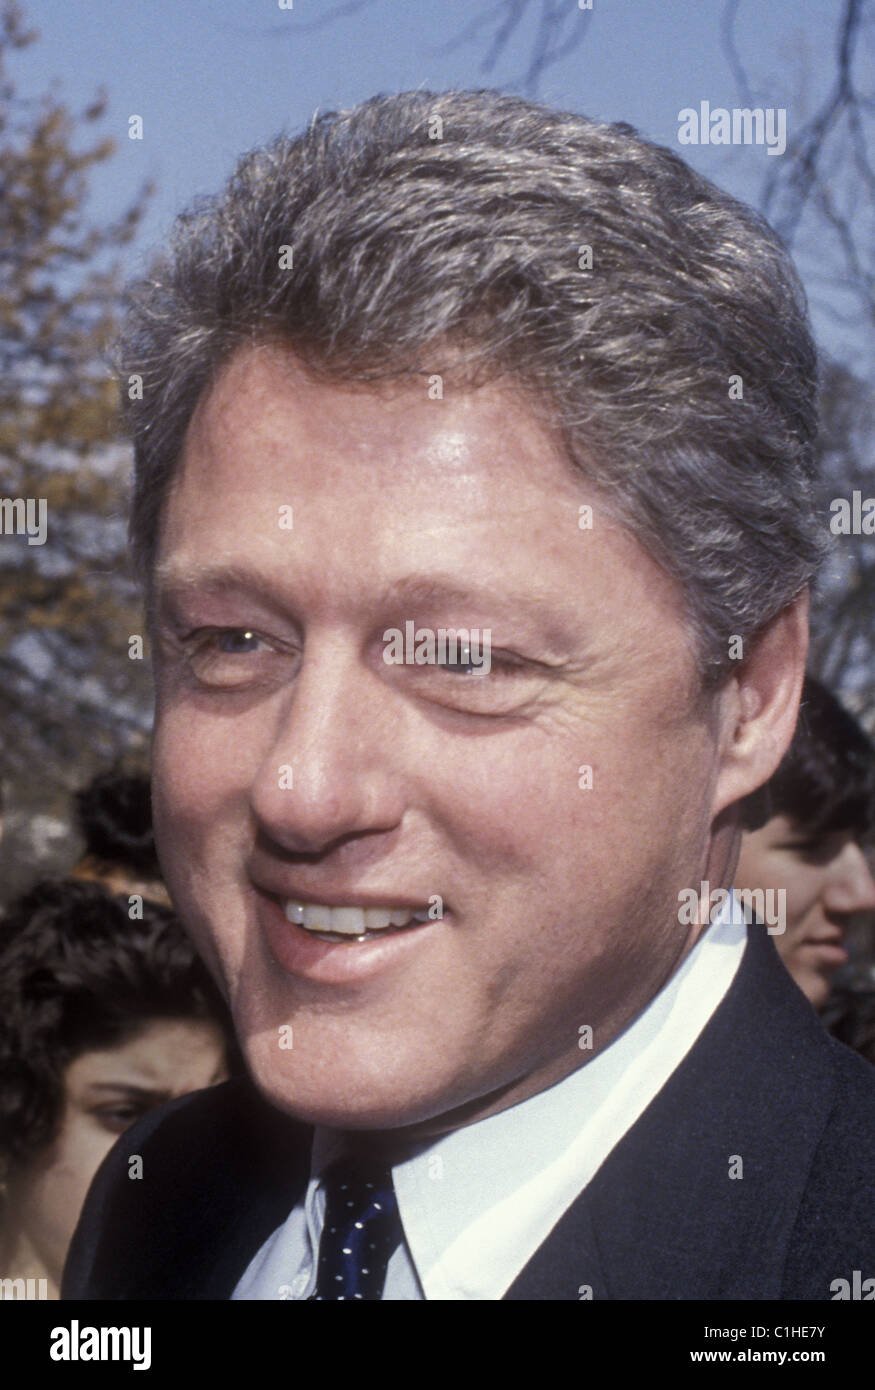 Democratic candidate to the presidency Bill Clinton visits a high school in New York City, february 23, 1992. Stock Photo